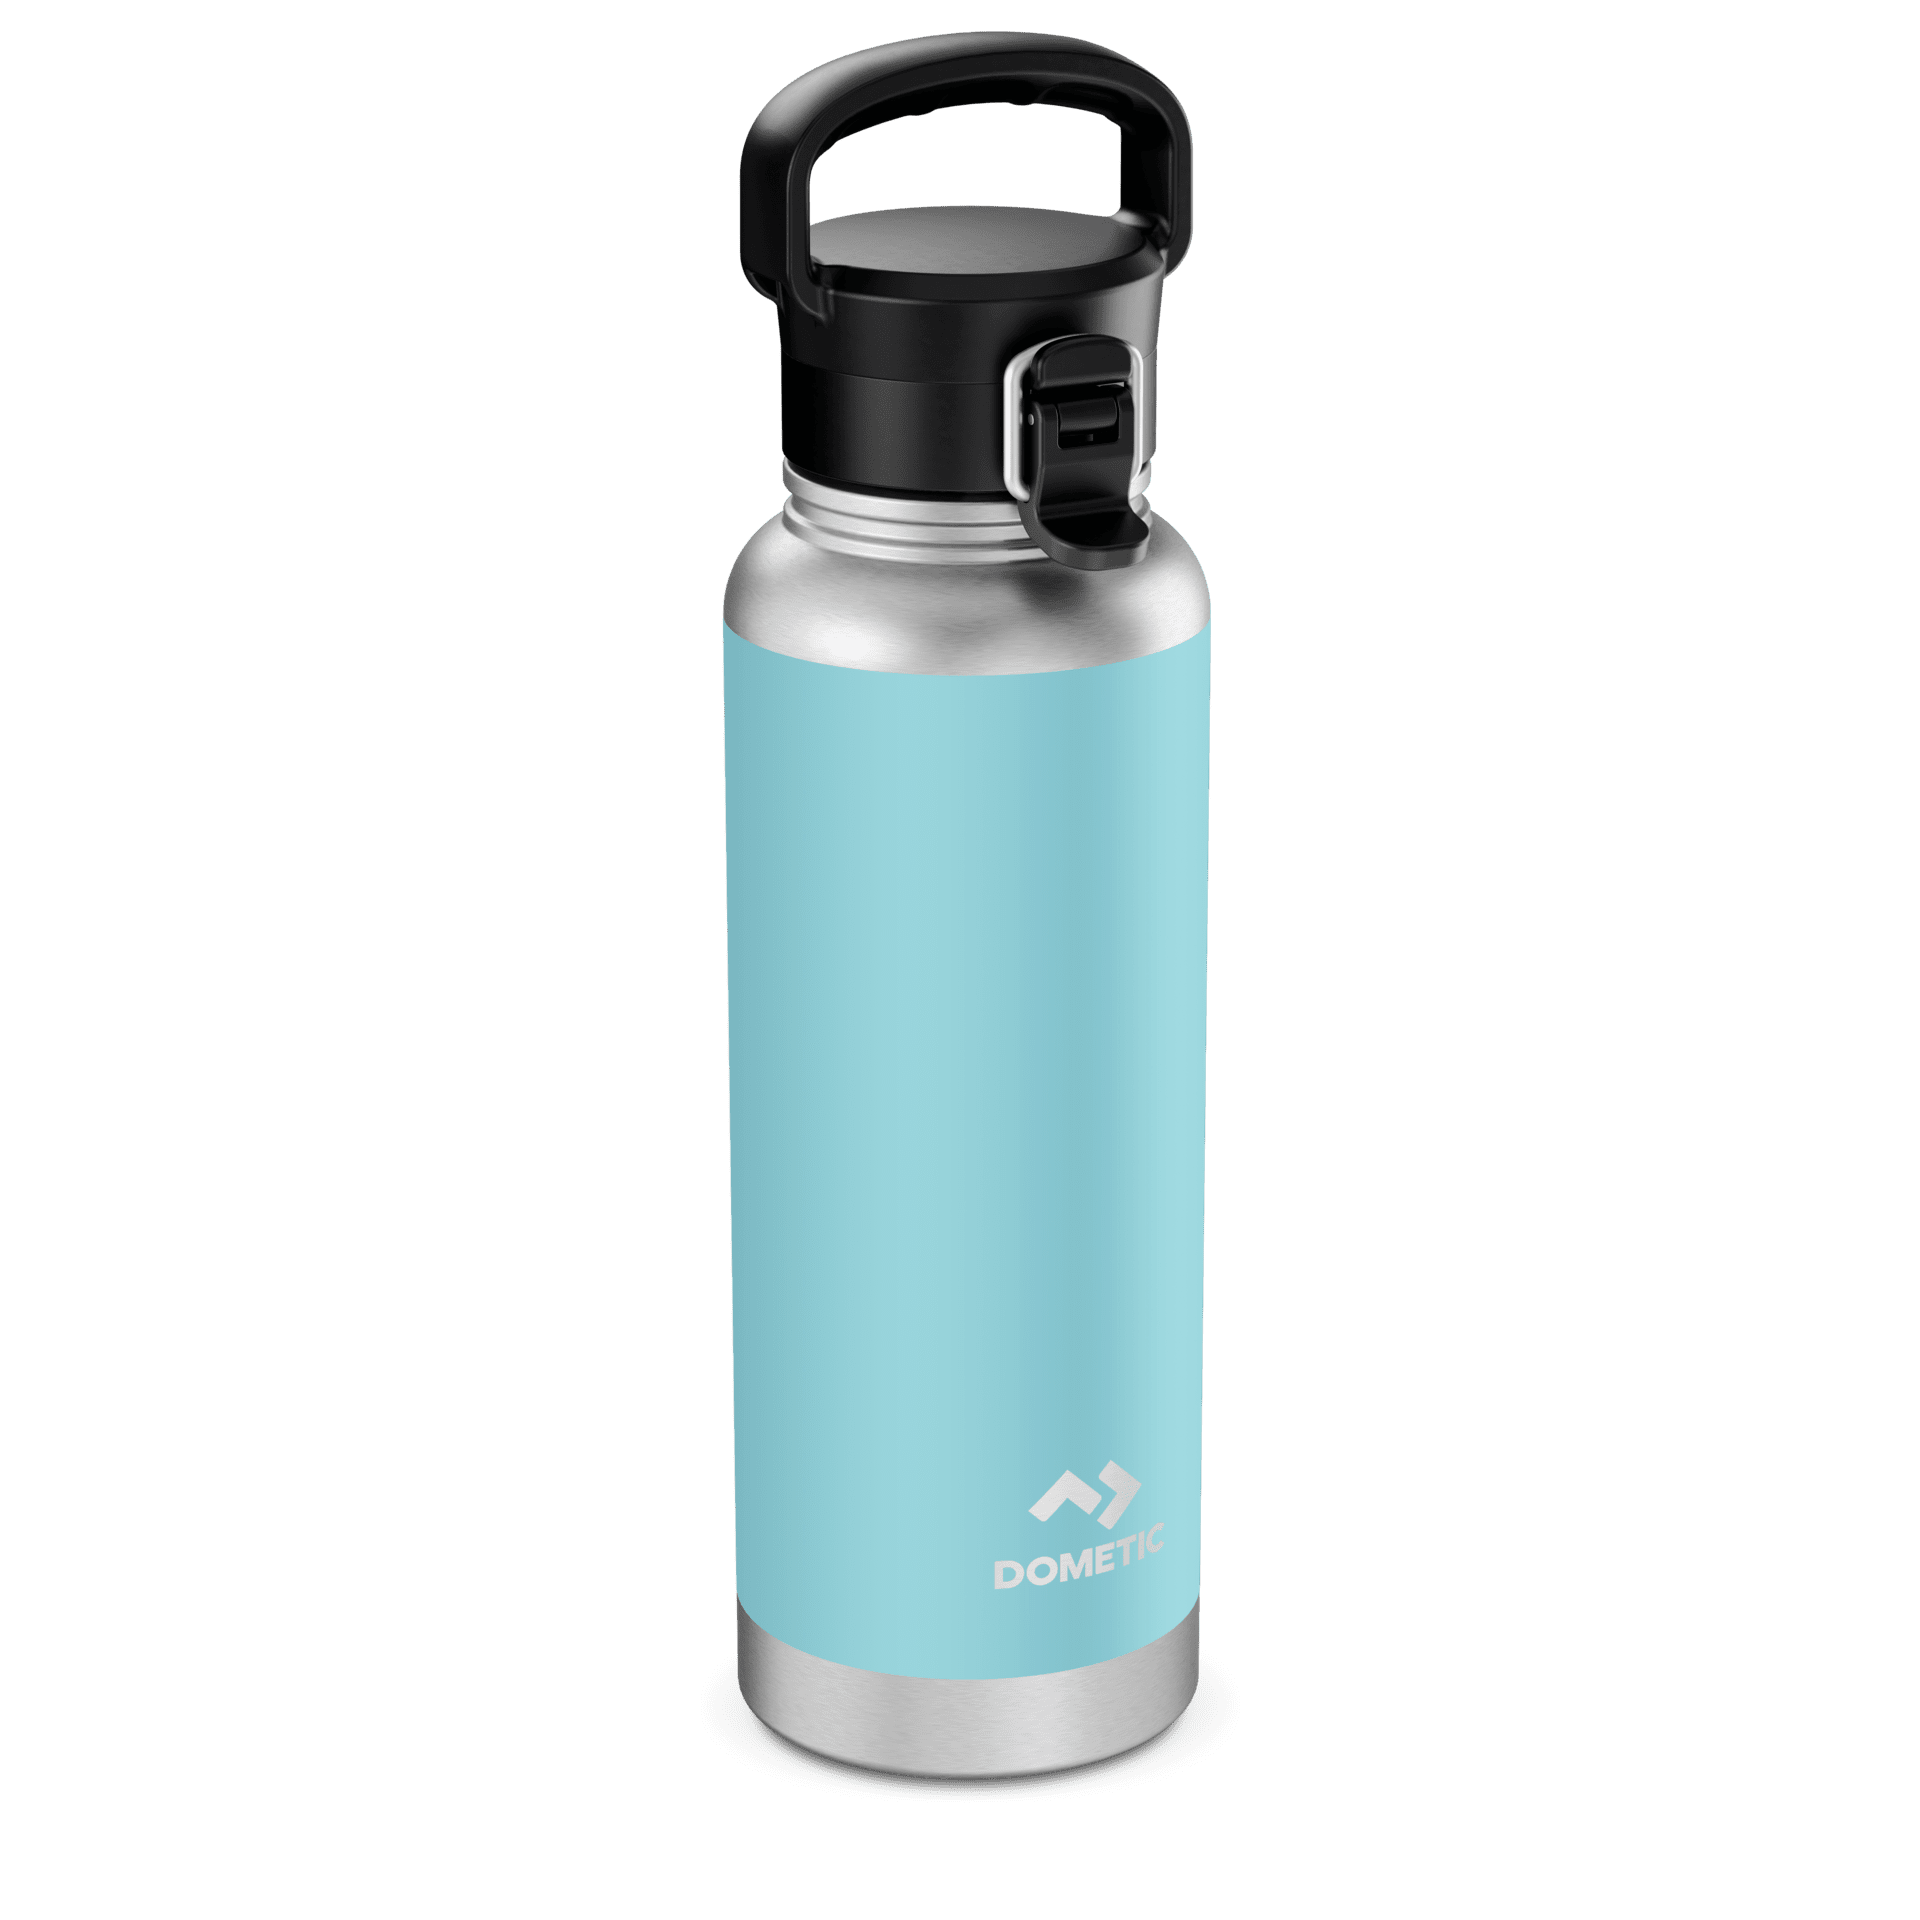 https://www.dometic.com/externalassets/dometic-thermo-bottle-120_9600050945_82877.png?ref=1736776761